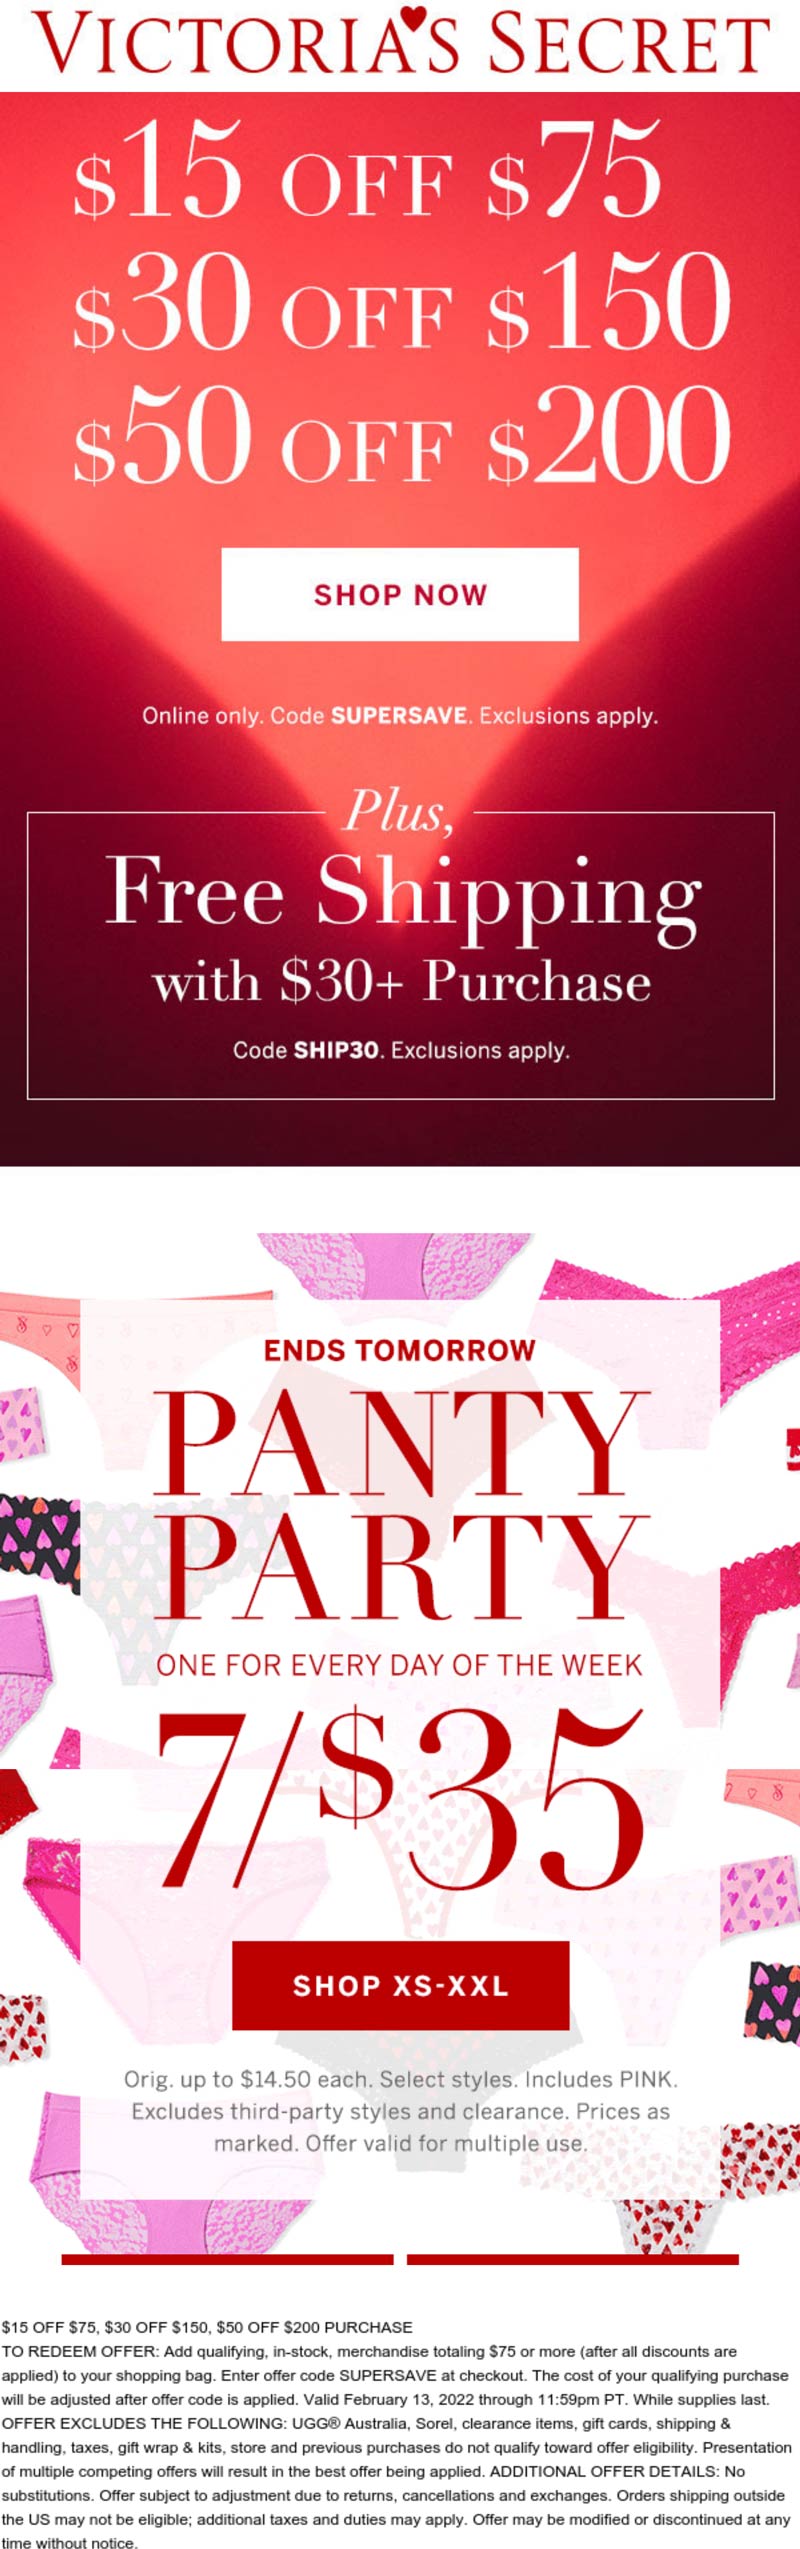 Victorias Secret stores Coupon  $15-$50 off $75+ today at Victorias Secret via promo code SUPERSAVE #victoriassecret 